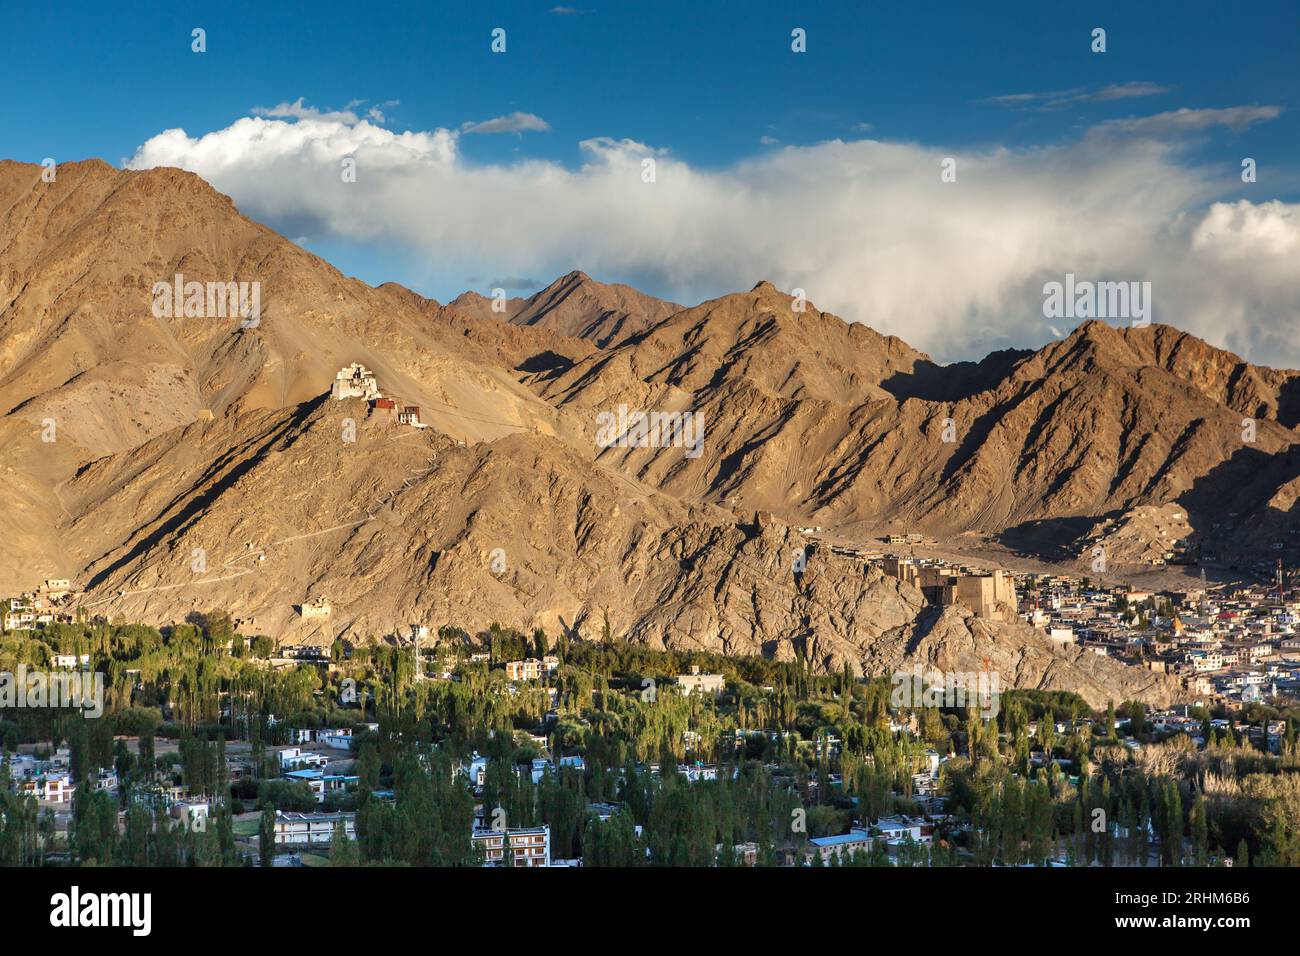 Sunset in Leh, Ladakh, India. Beautiful mountain landscape with temple in the hill above Leh town. Stock Photo